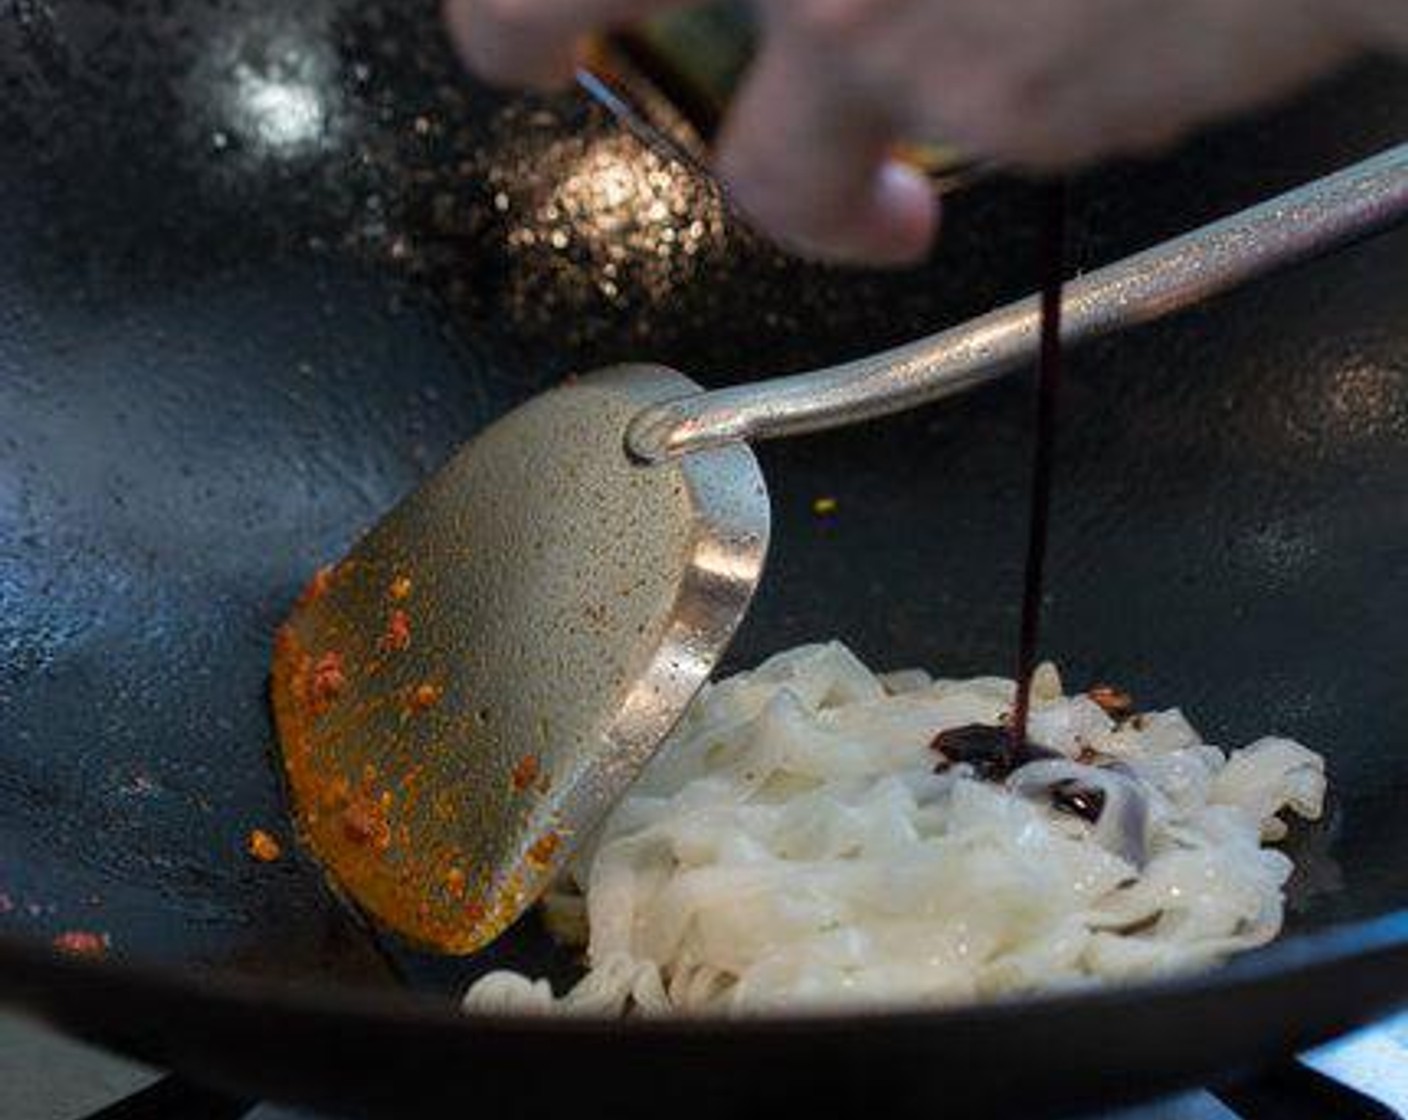 step 4 Add Rice Noodles (1 1/2 cups) into the wok. Drizzle the Light Soy Sauce (2 Tbsp), Dark Soy Sauce (1/2 tsp) and Oyster Sauce (1/2 tsp) over the noodles. Stir well. Make sure all of the noodles are covered in the sauce.